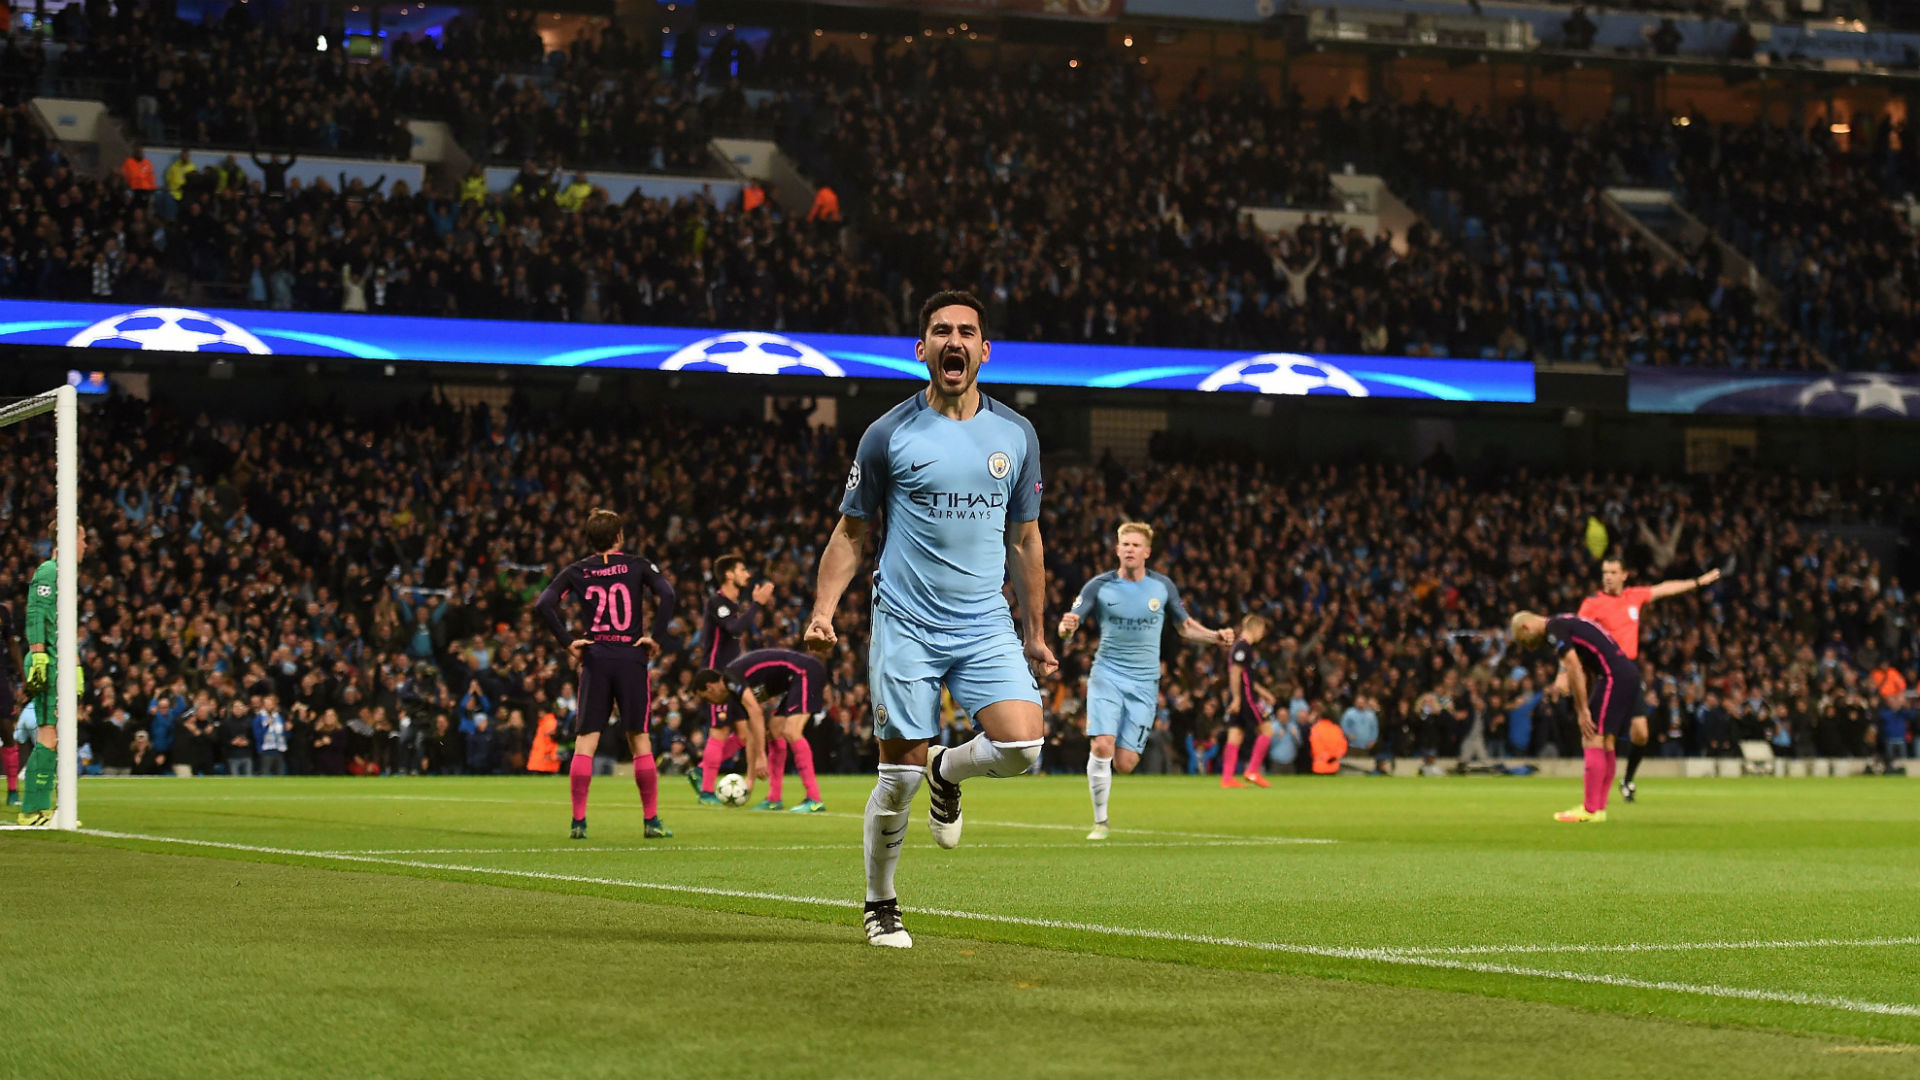 Ilkay Gundogan after scoring in City's 3-1 victory over Barcelona in the Champions League. (Photo via Getty Images)